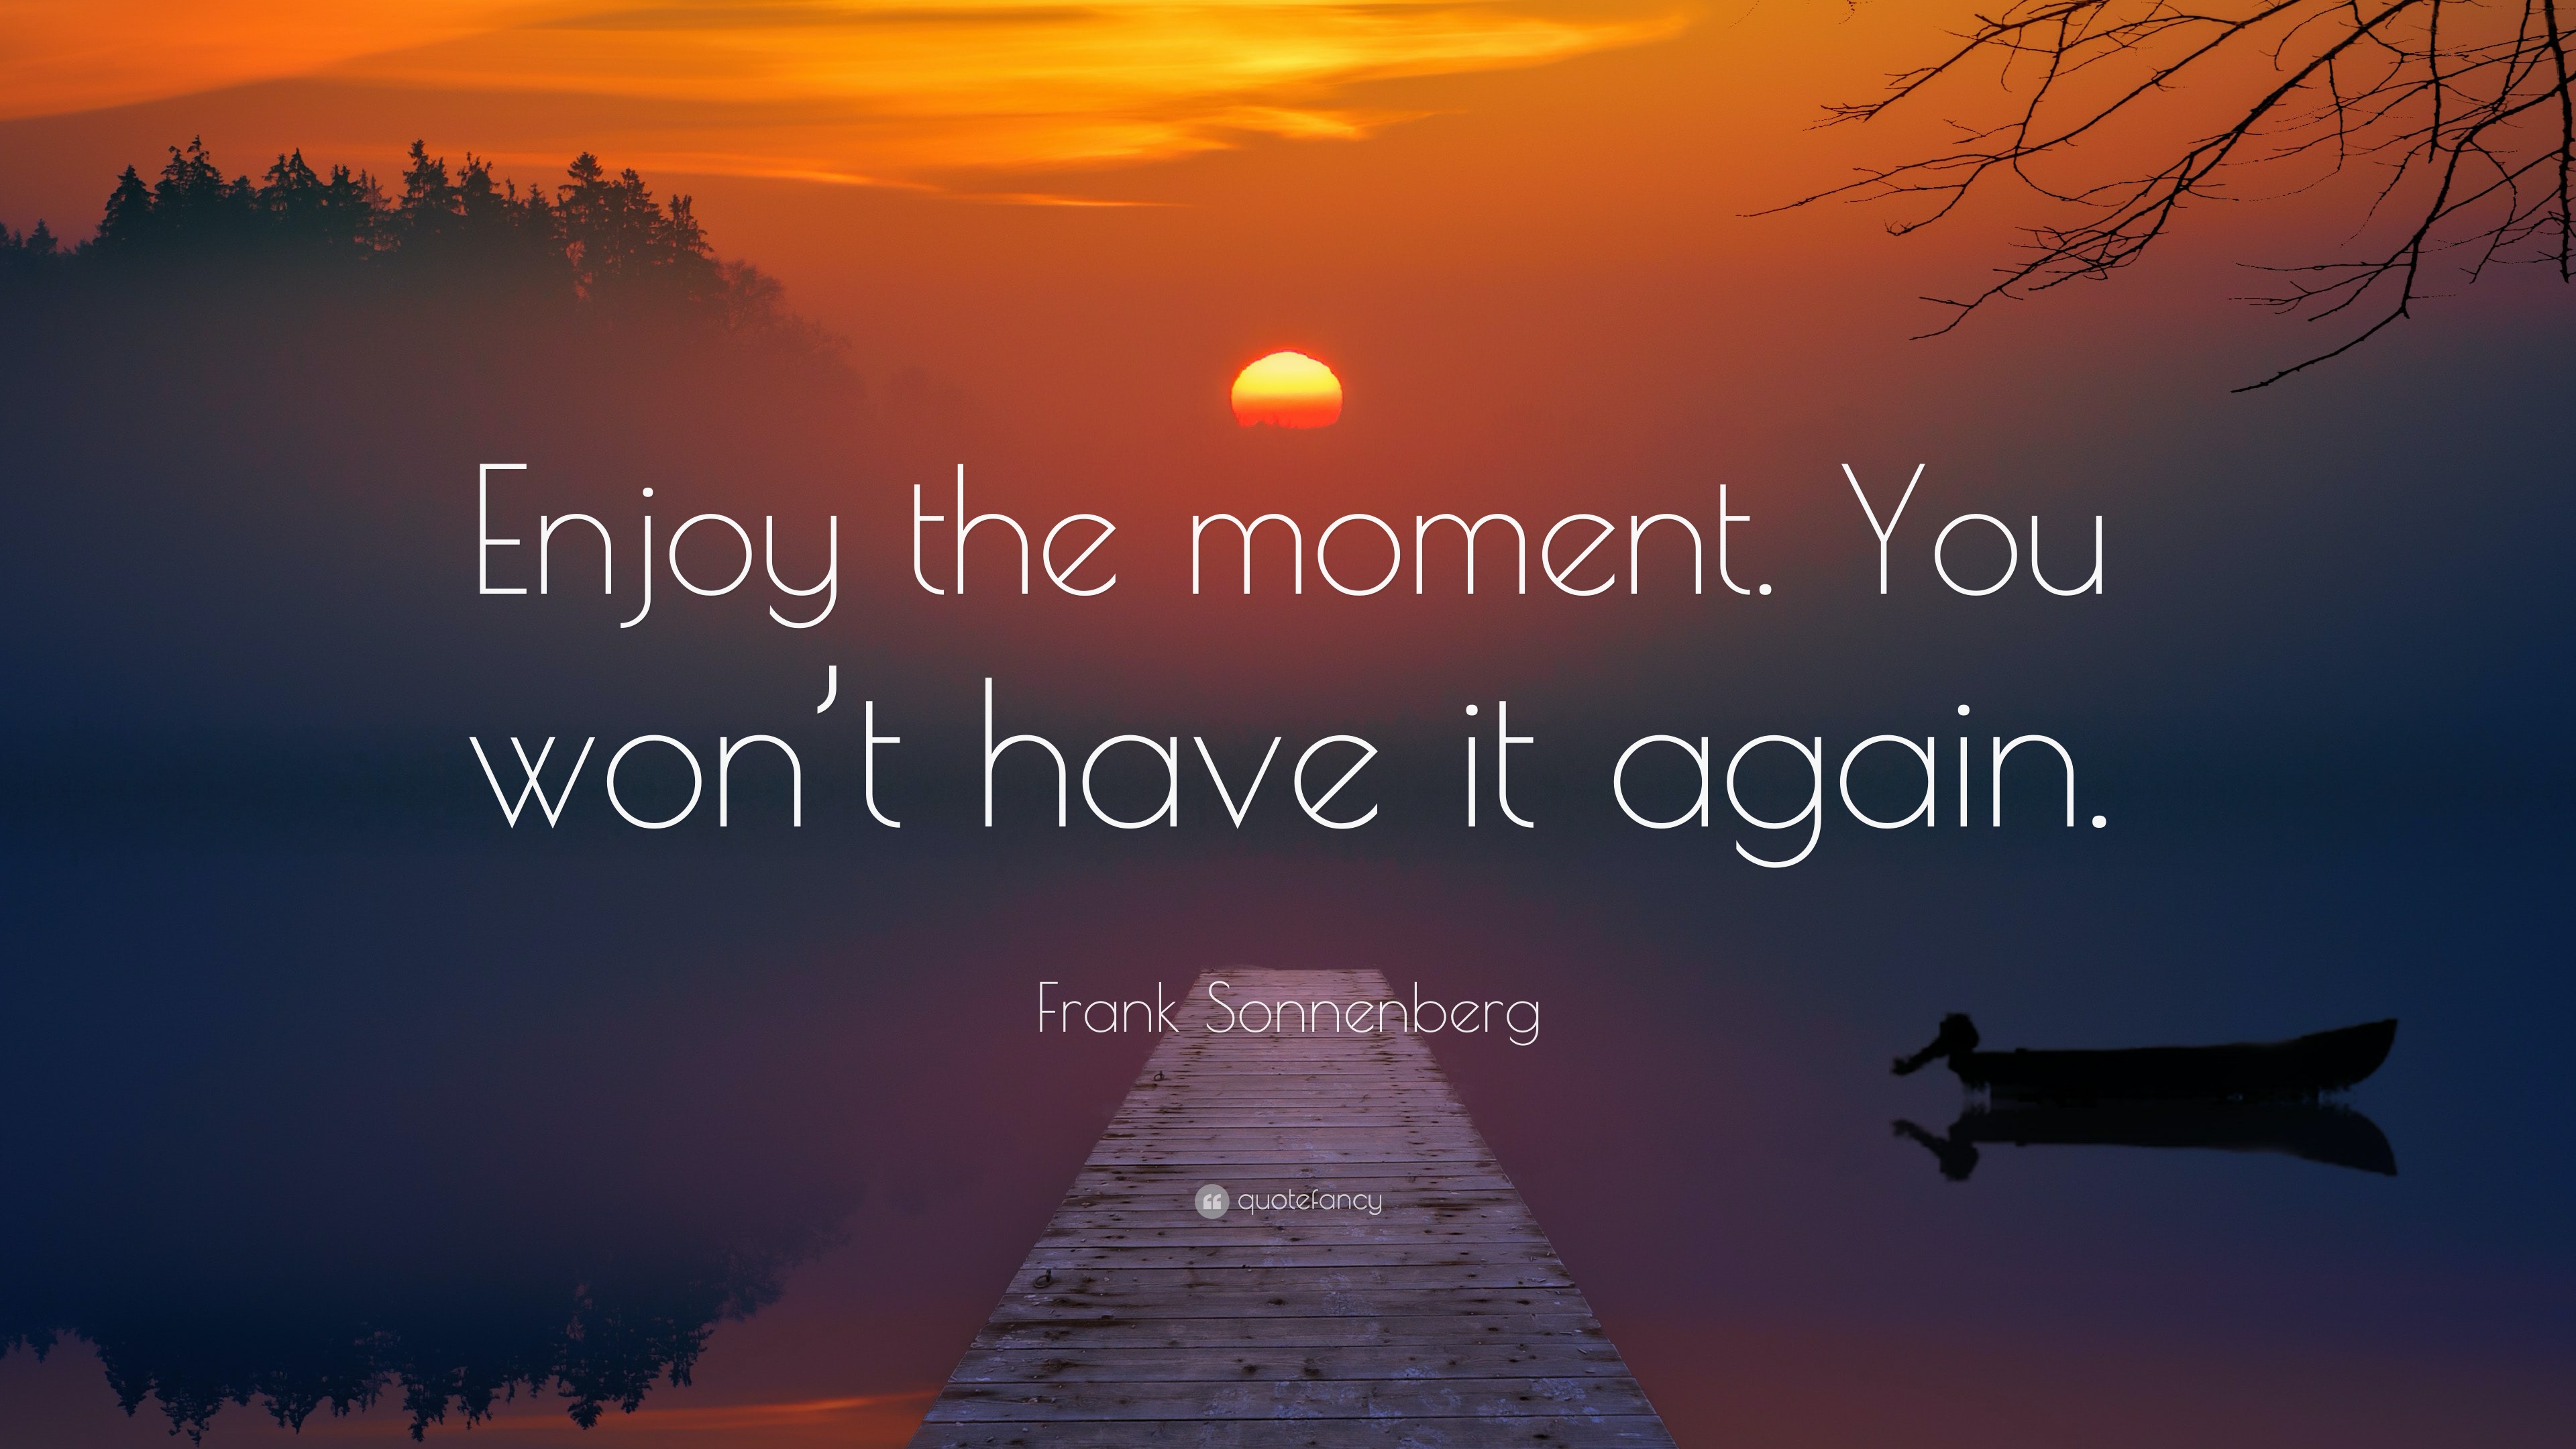 Frank Sonnenberg Quote: “Enjoy the moment. You won't have it again.”